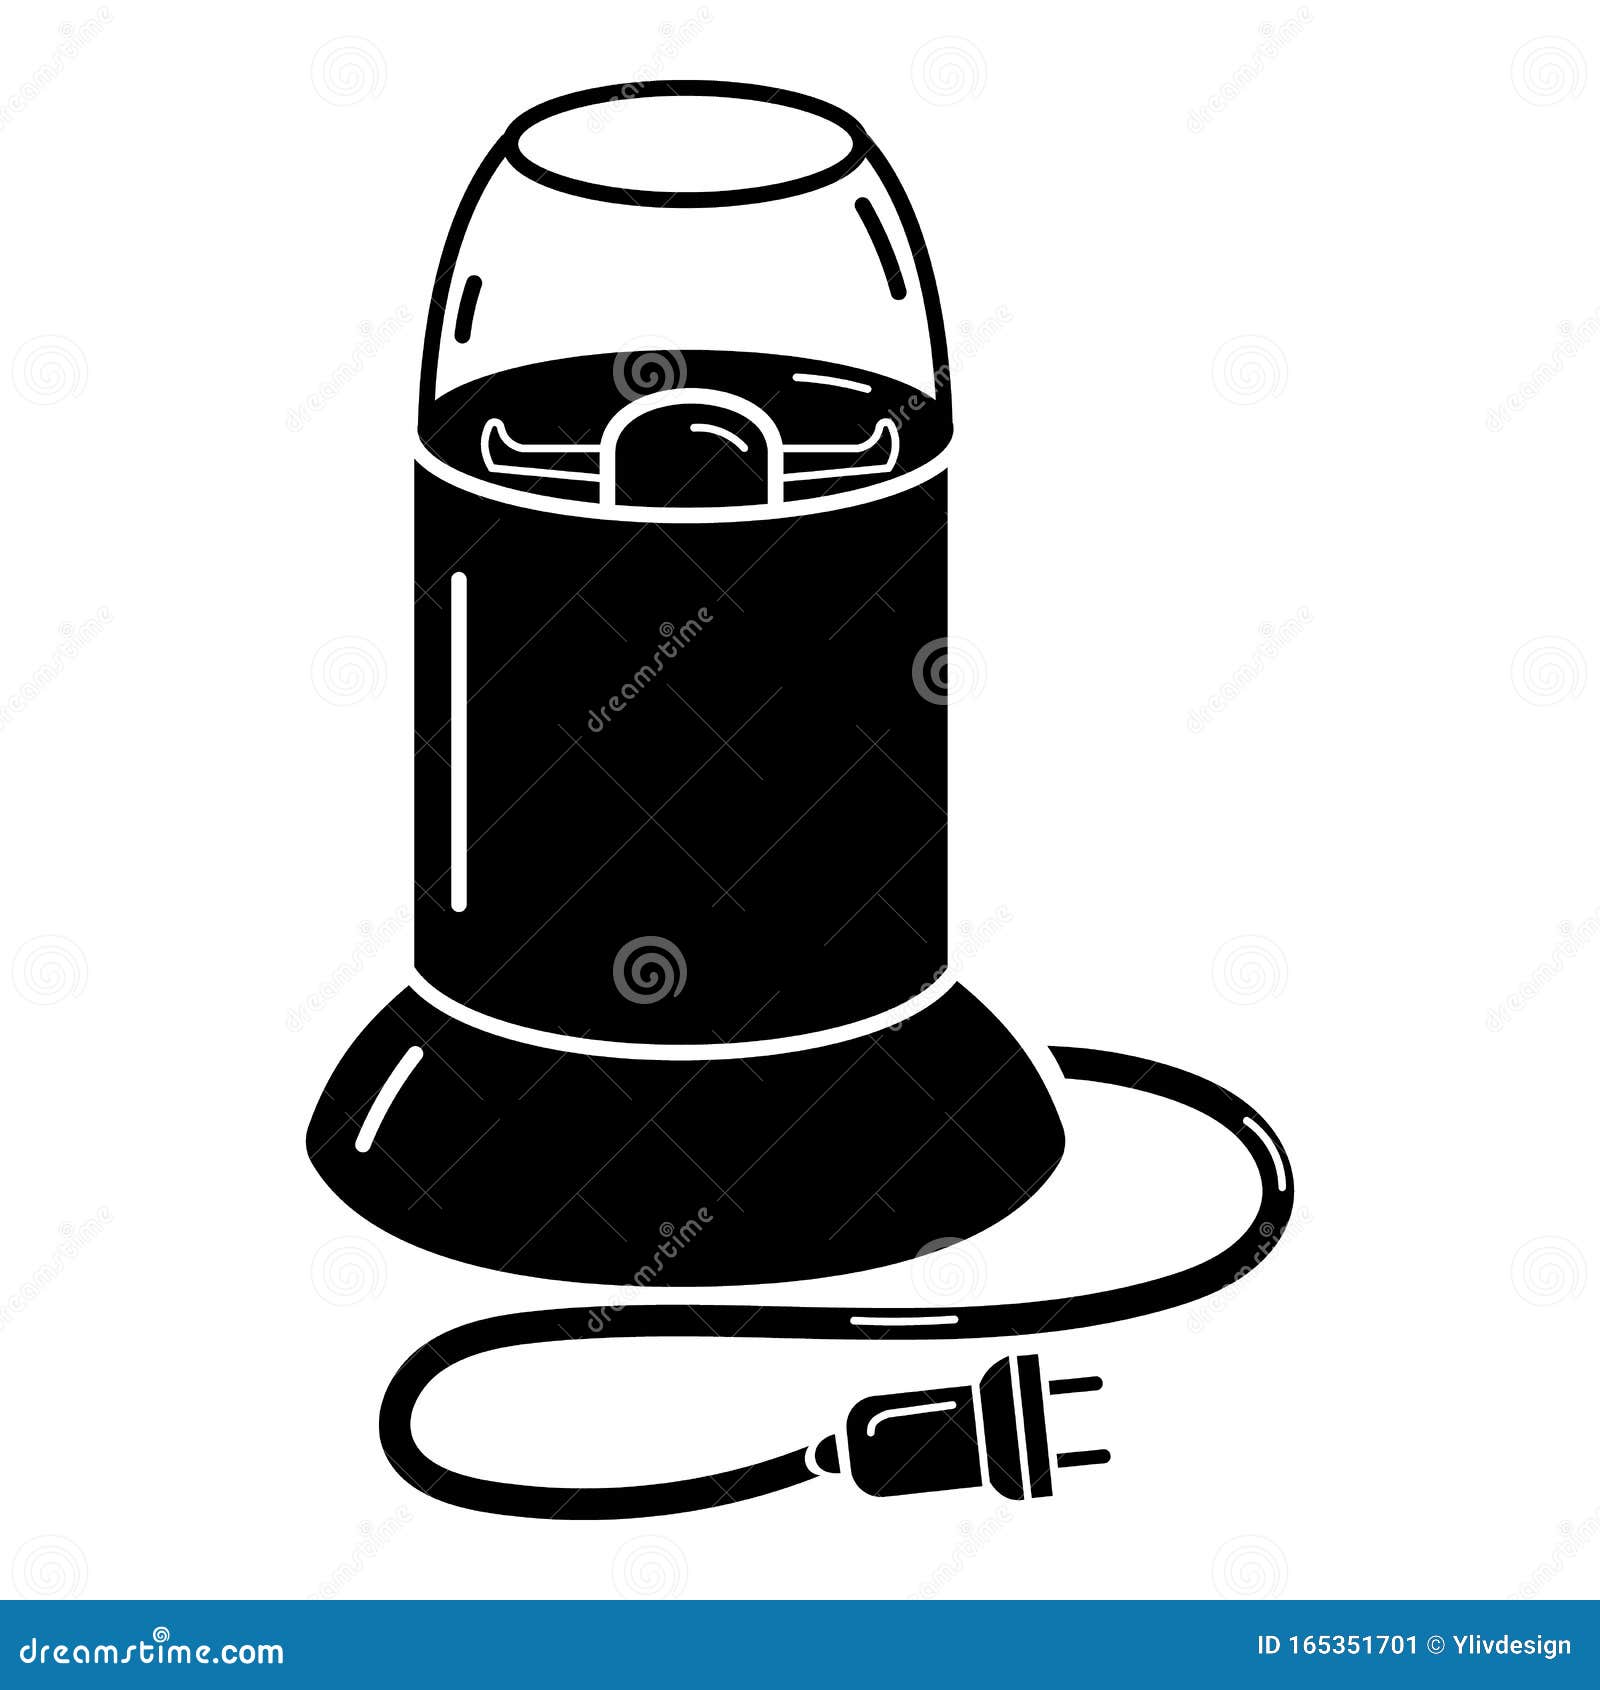 electric coffee grinder icon, simple style